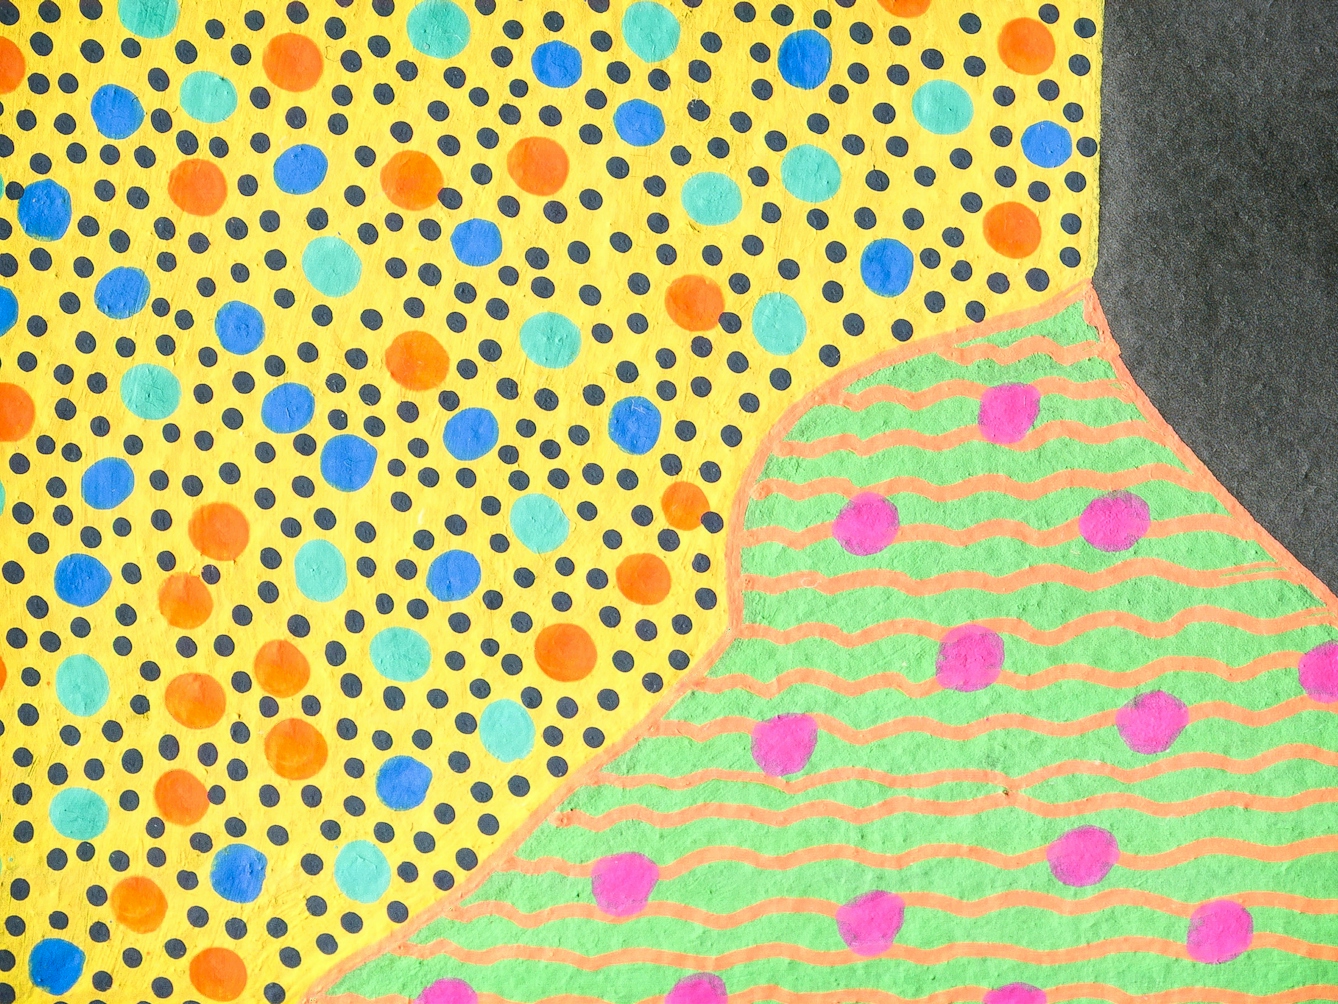 Artwork created by painting over the surface of a black and white photographic print with colourful paint. The artwork shows an original section of the photographic print in the top right.  Apart from this section the left of the image is a painted yellow background covered in small green, orange and blue dots. The bottom right corner has a green background with wavy orange horizontal lines and pink spots. The texture of the paint can be seen, including the boundary between the painted area and the original photographic print.